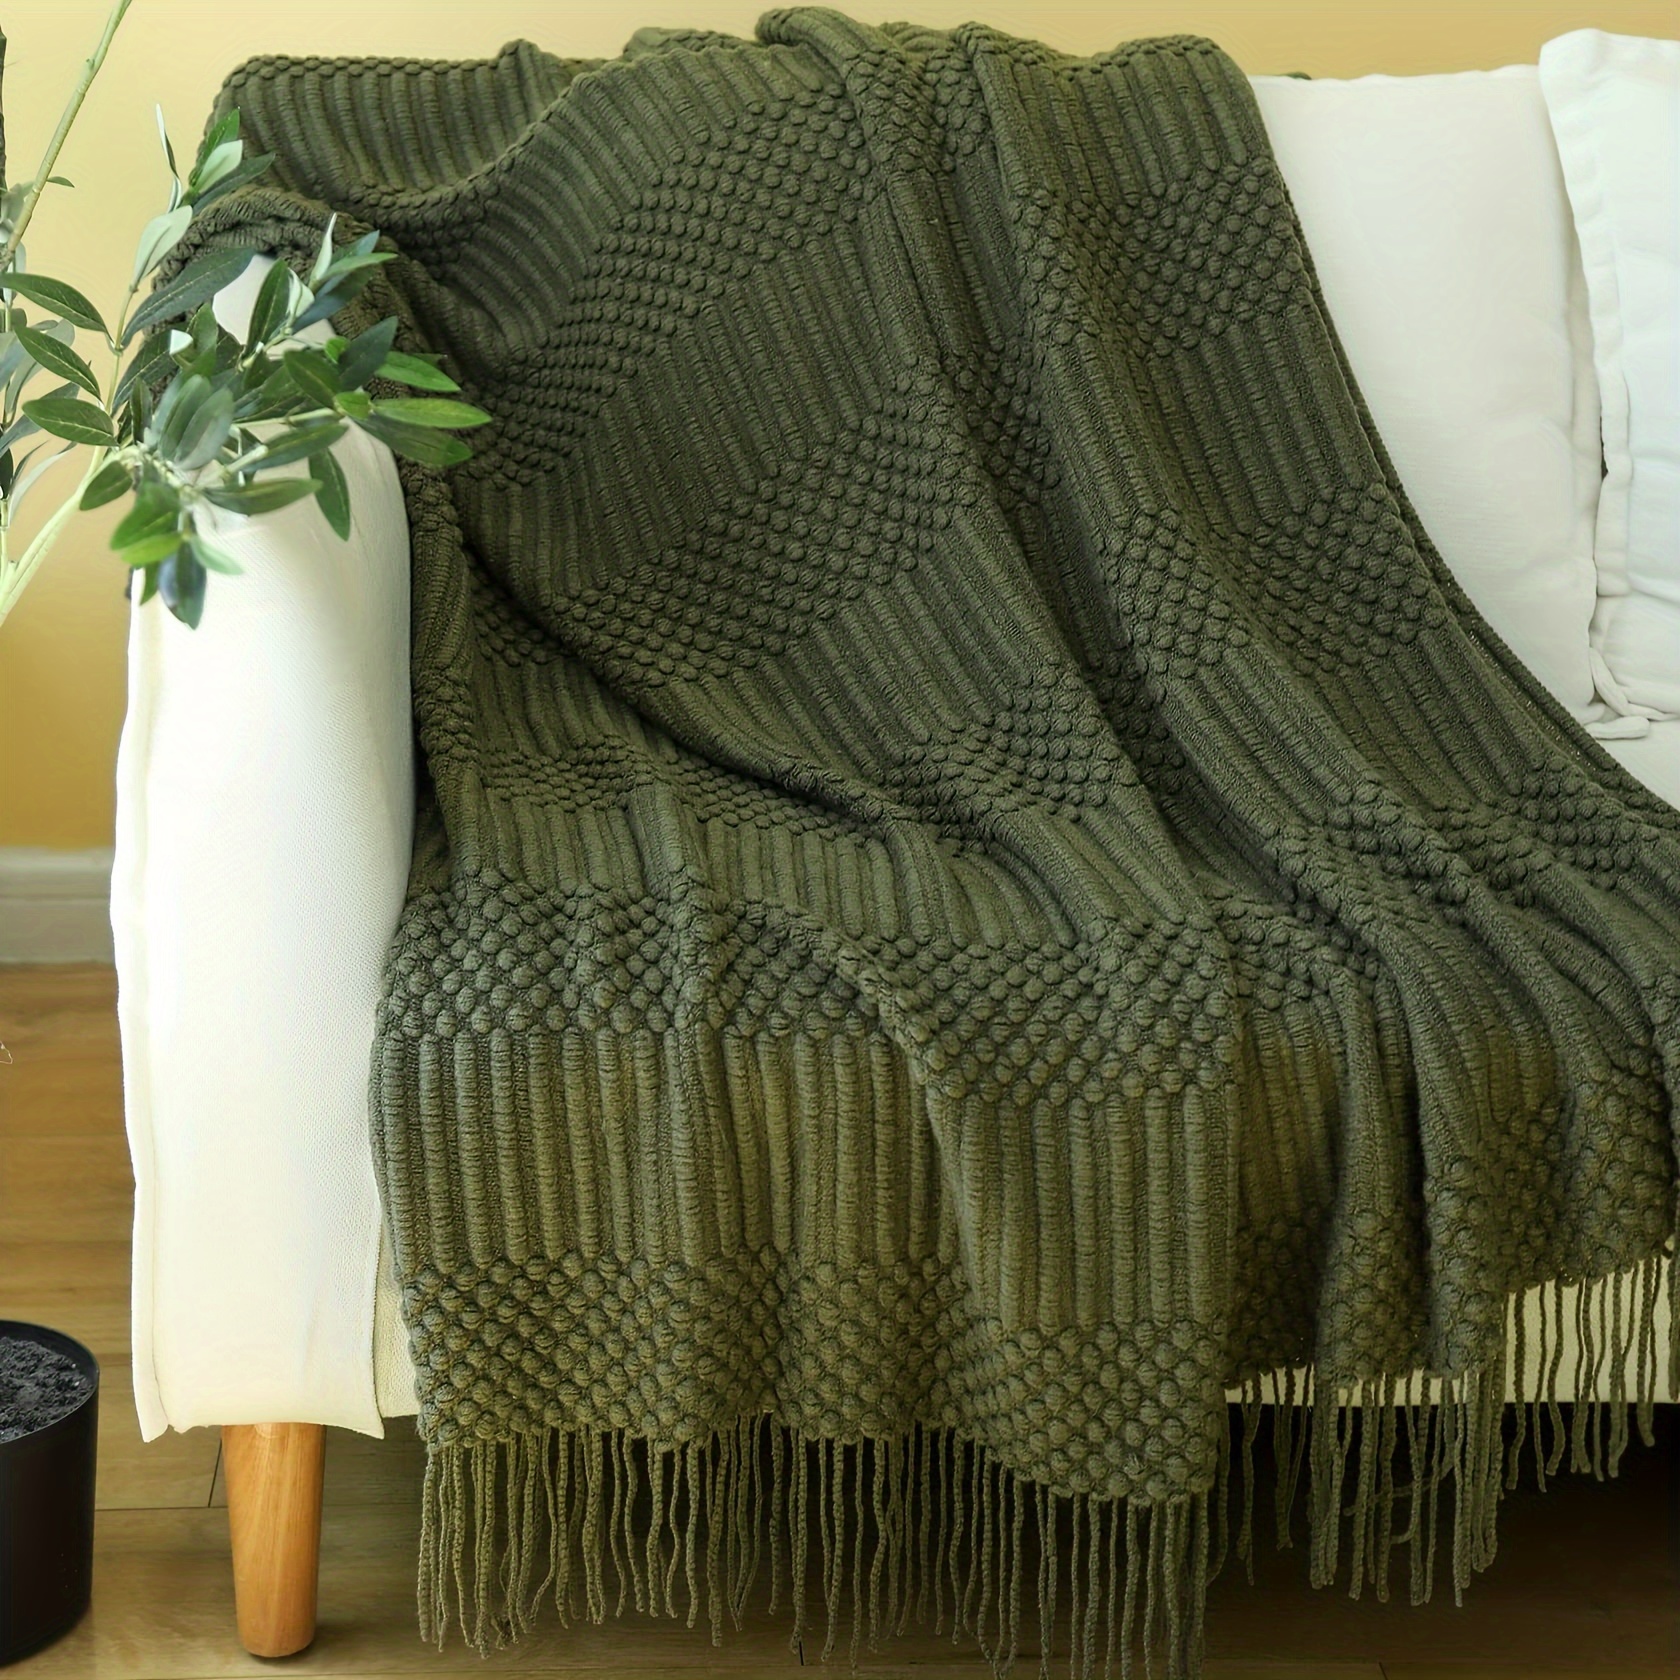 

1pc Textured Throw Blanket Soft Vintage Decorative Knitted Blanket With Tassel For Couch, Bed, Farmhouse And Home Decor